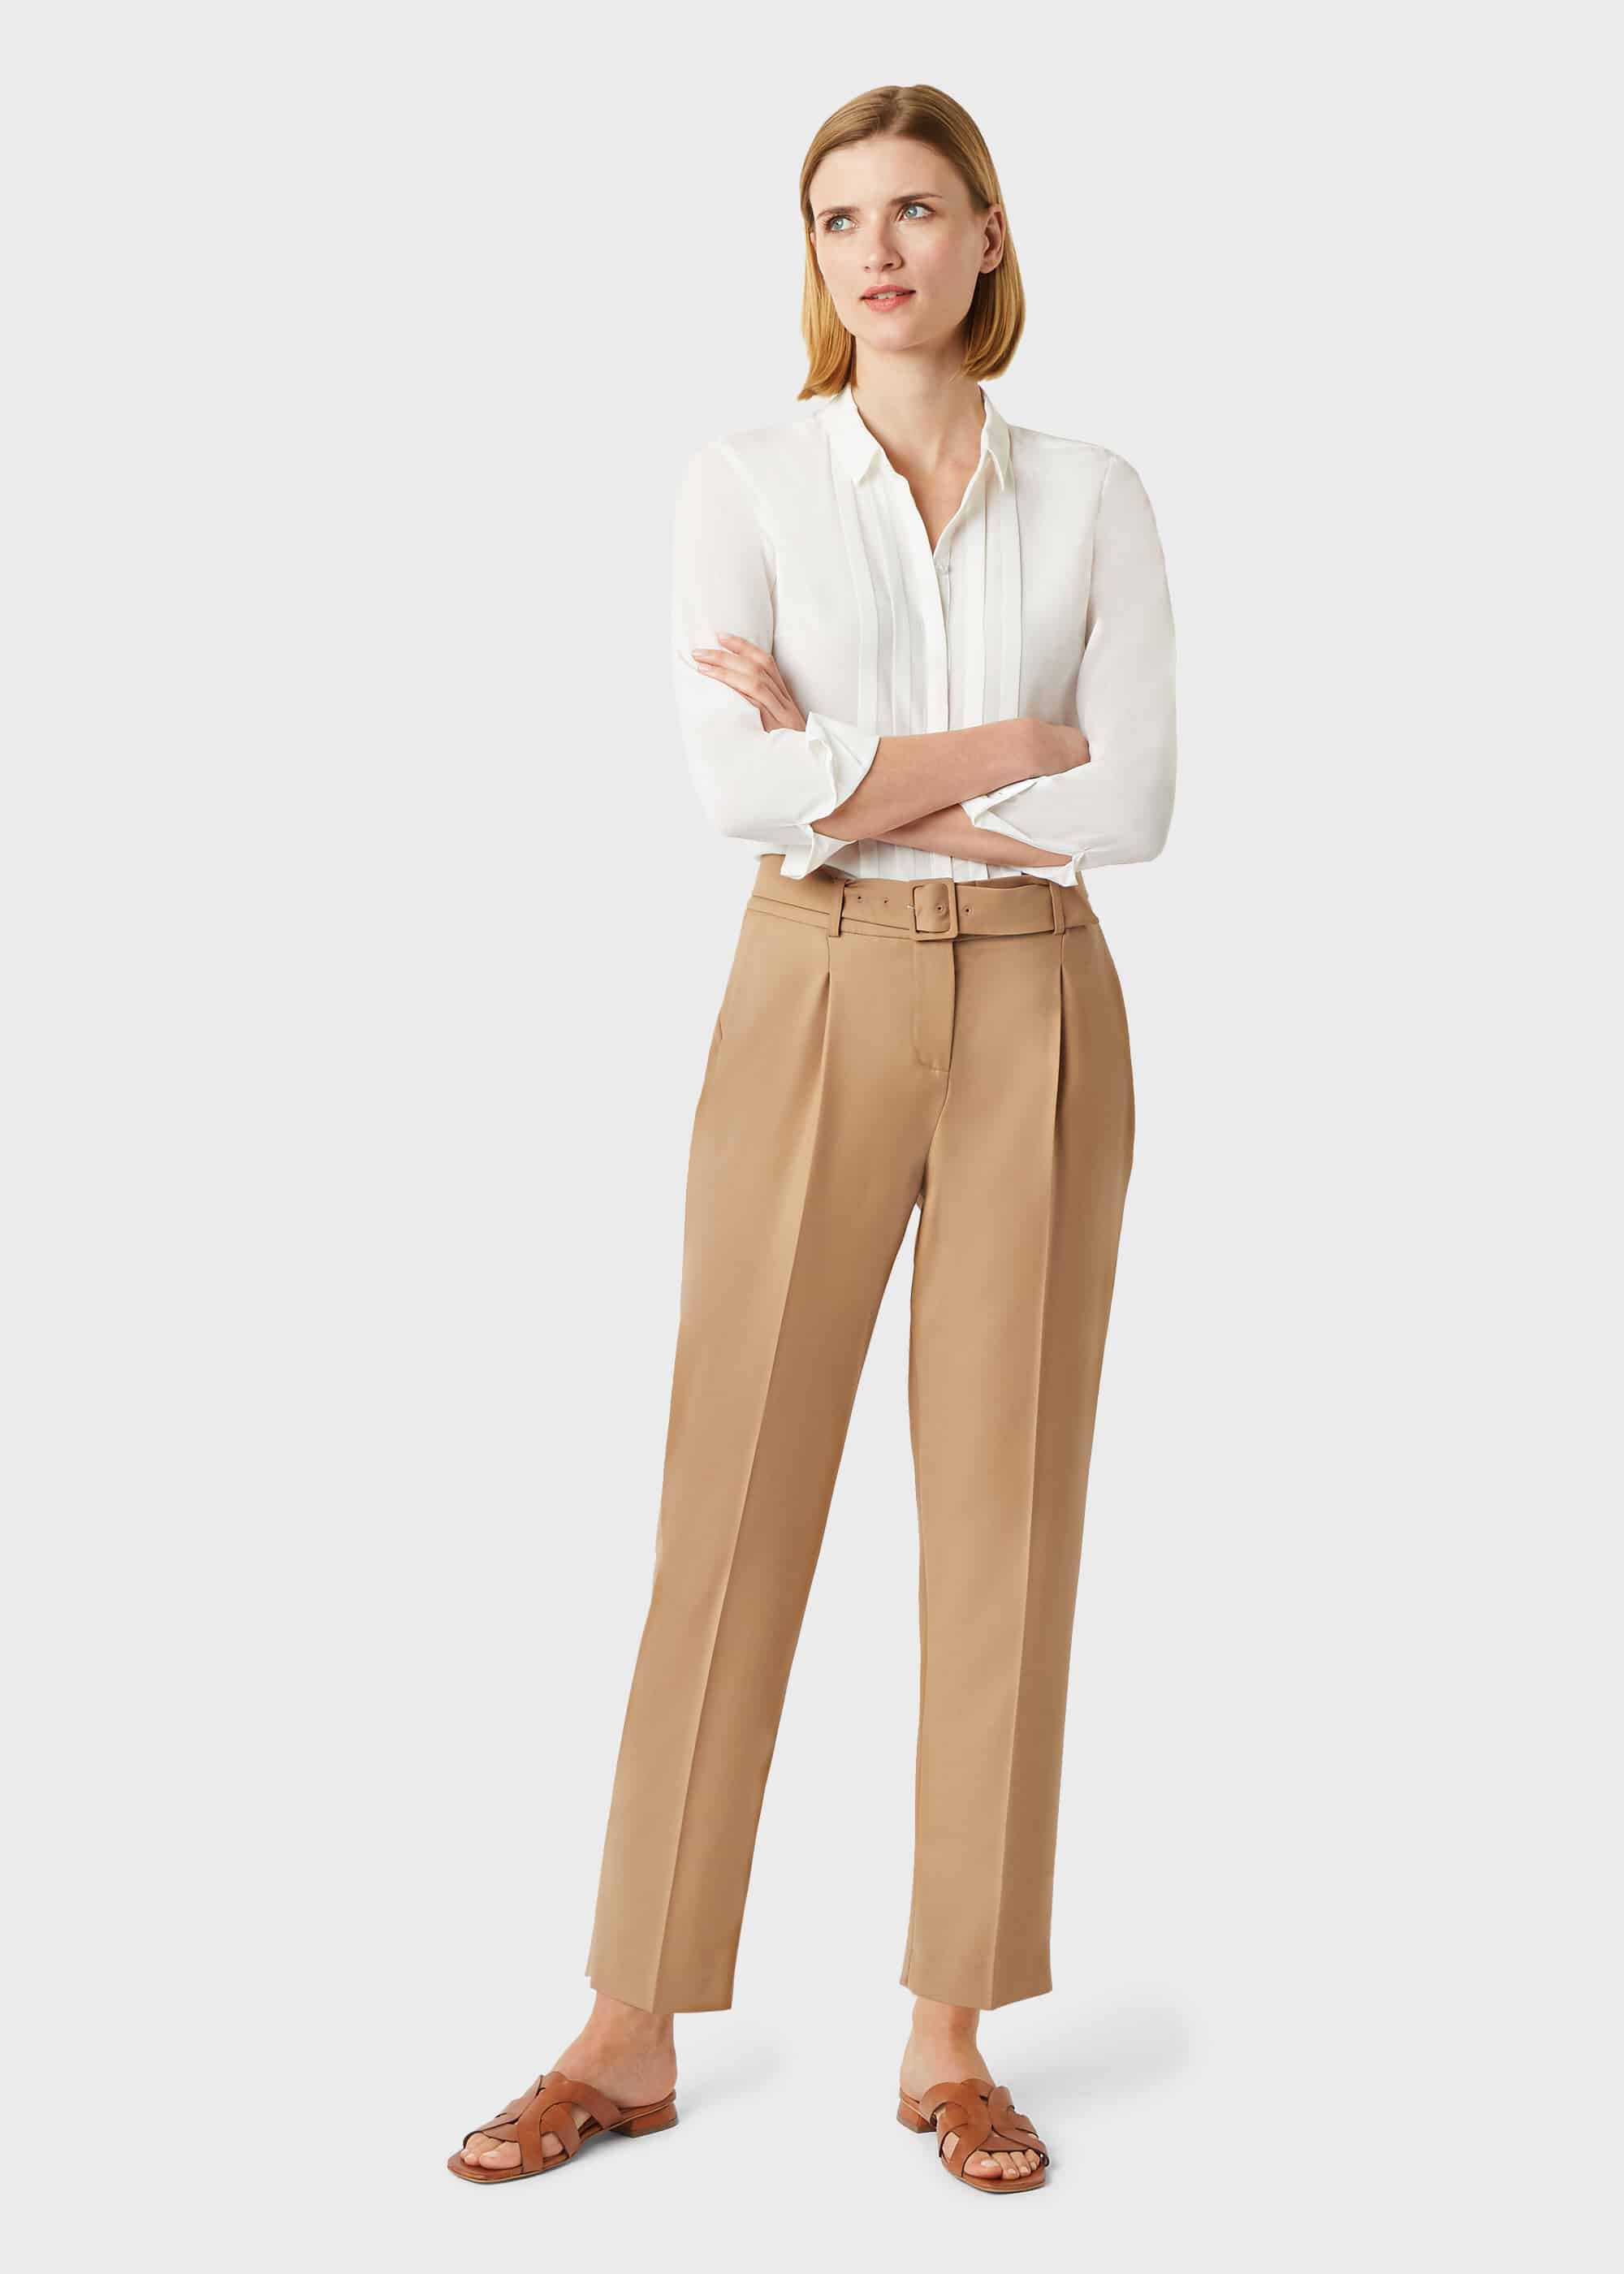 FSLE Women's Winter Waist Decoration Thickened Dark Gray Casual Cropped Trousers  Camel Color Straight All-match Suit Pants